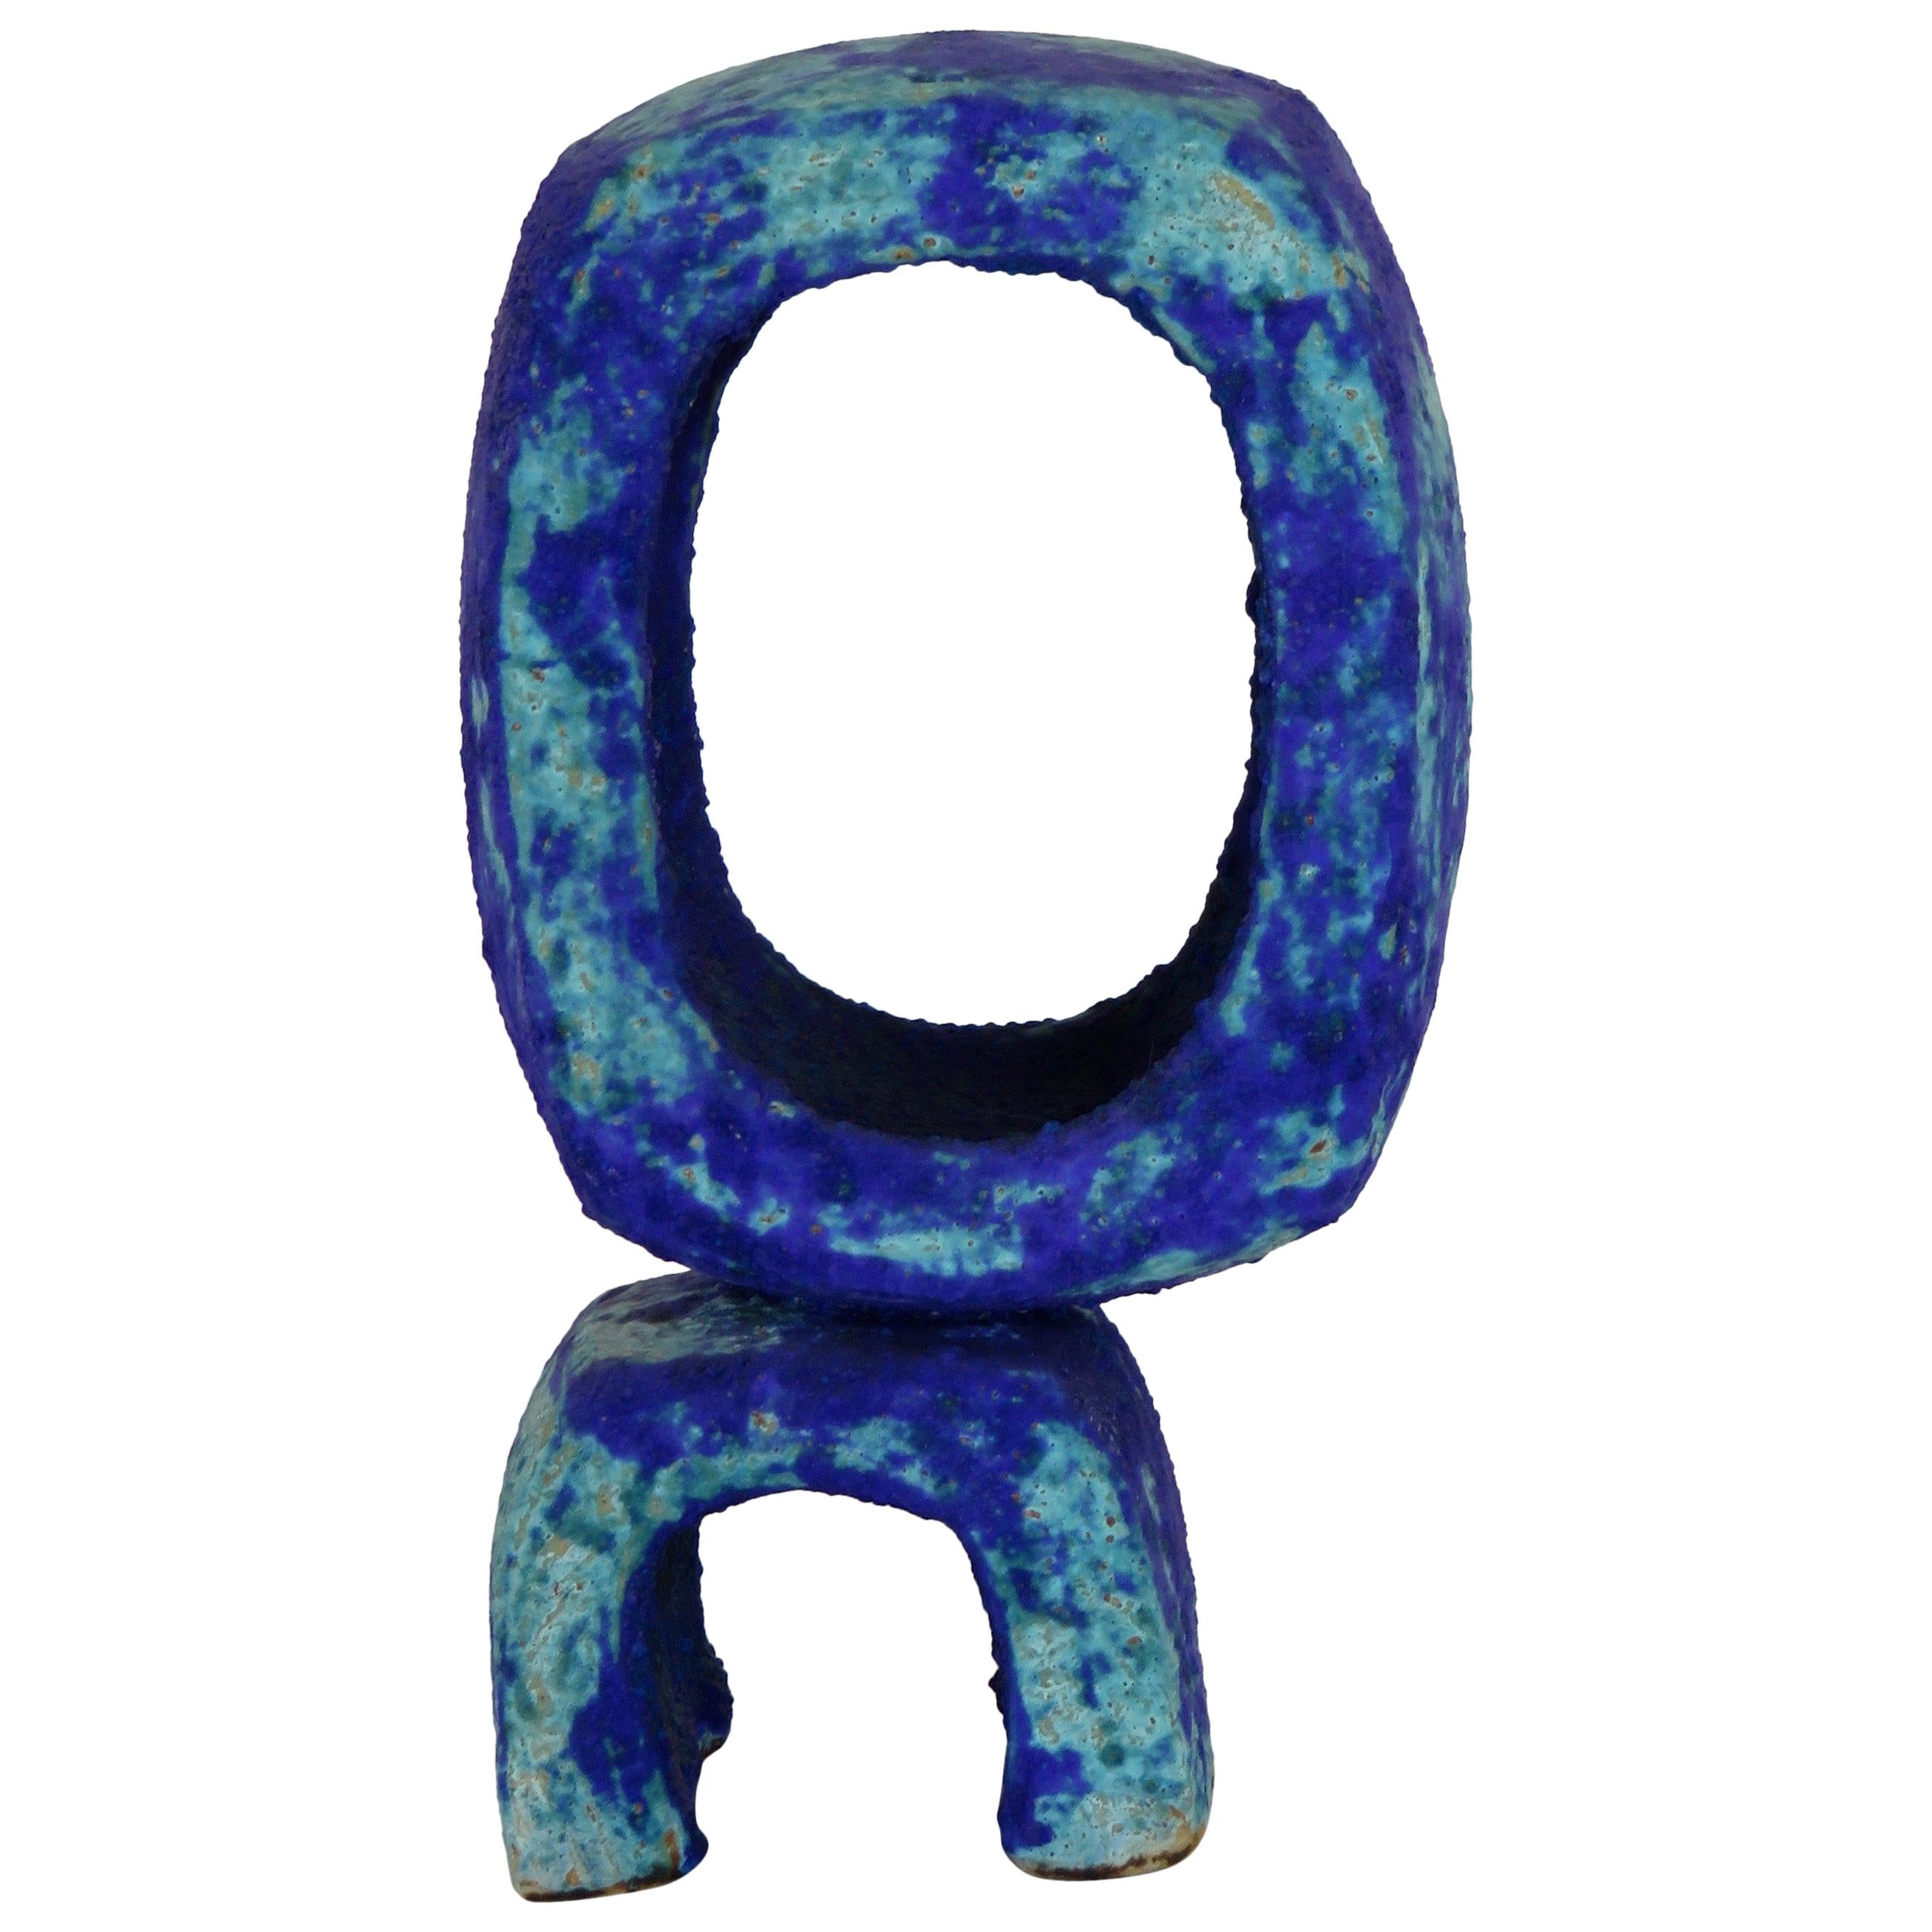 Handbuilt Standing Oval Ceramic Sculpture in Turquoise and Deep Blue #1